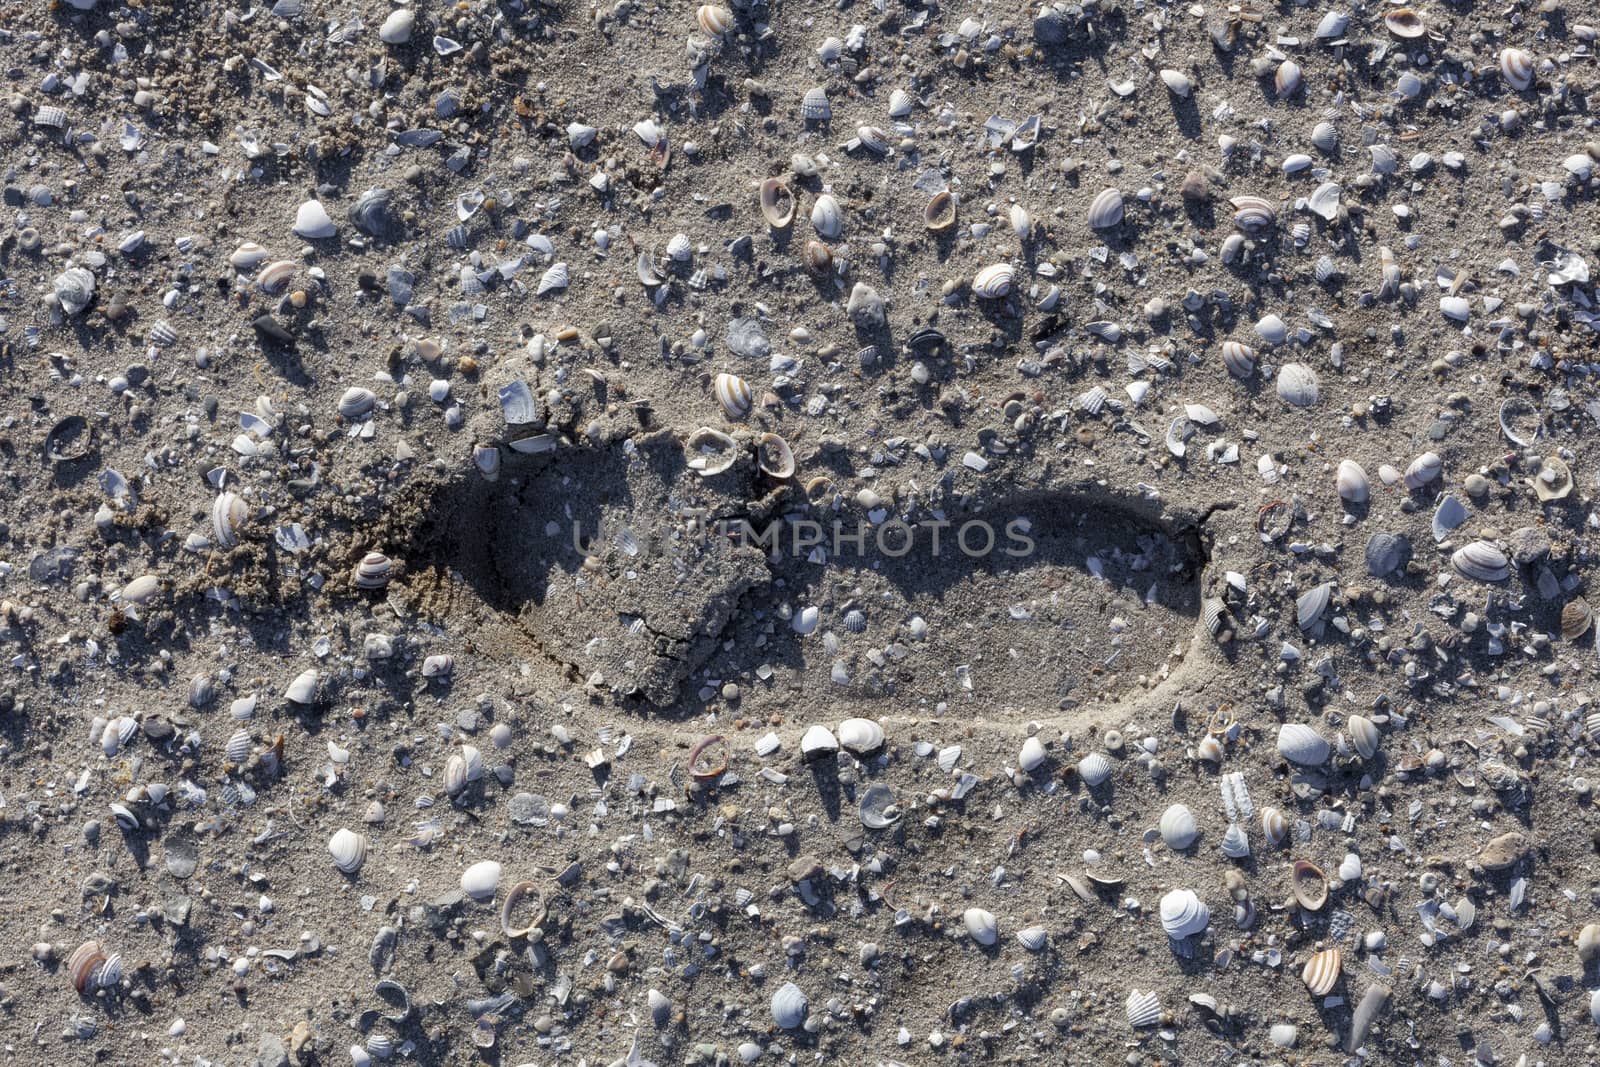 Single boot footstep inprinted in sand with a lot of shells